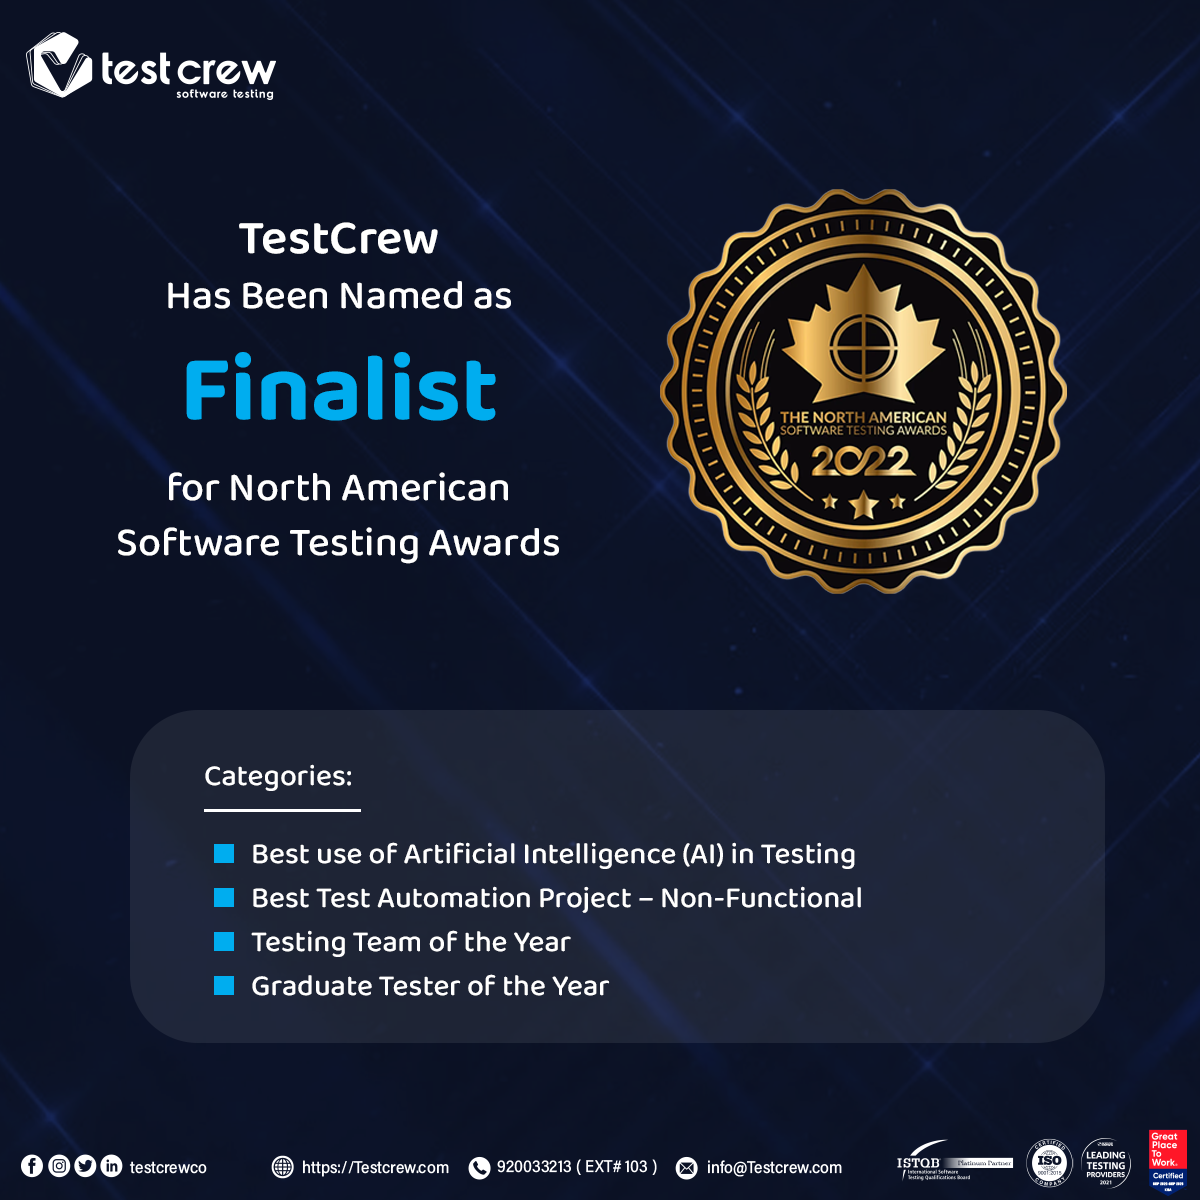 TestCrew as Finalist in the North American Software Testing Awards